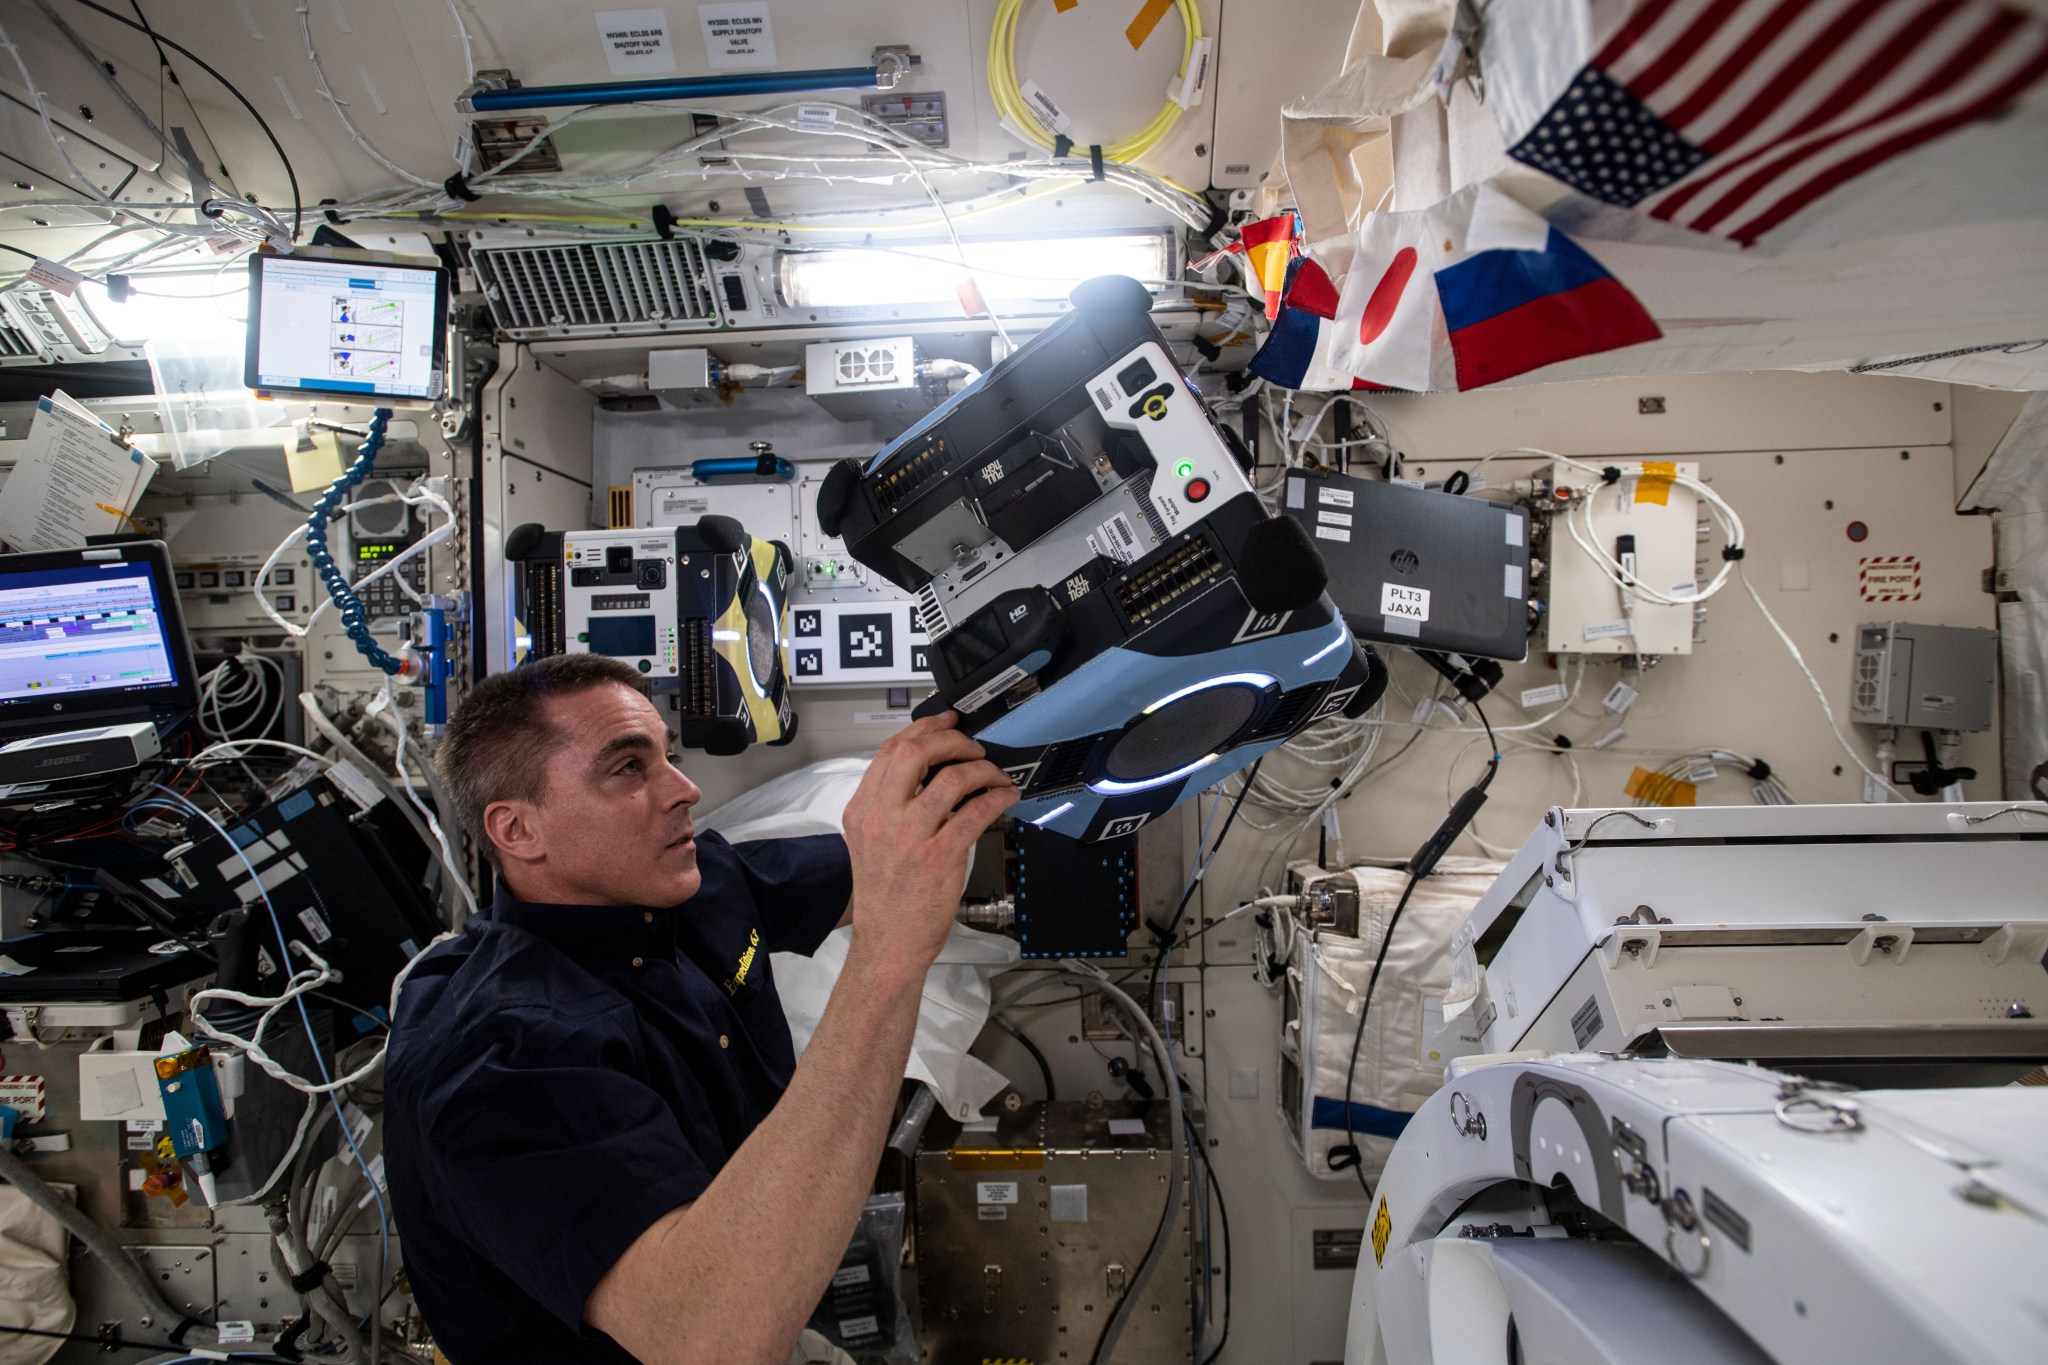 Expedition 63 Commander Chris Cassidy prepares an Astrobee free flying robotic system for Japan Aerospace Exploration Agency